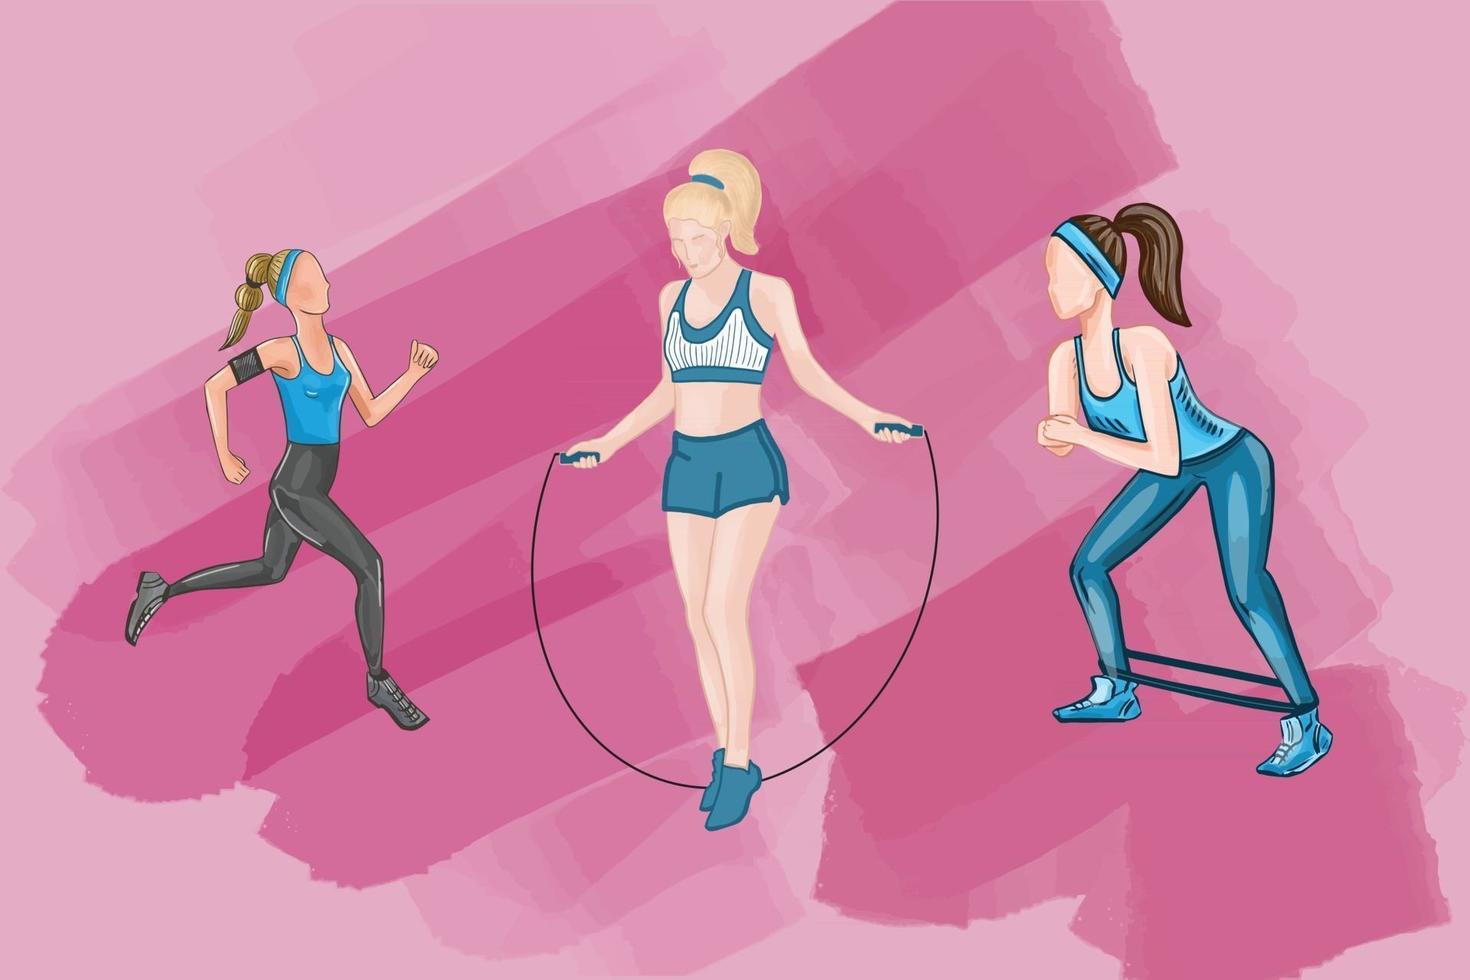 https://static.vecteezy.com/system/resources/previews/002/512/050/non_2x/illustration-of-fitness-girls-performing-sports-exercises-on-a-pink-background-vector.jpg